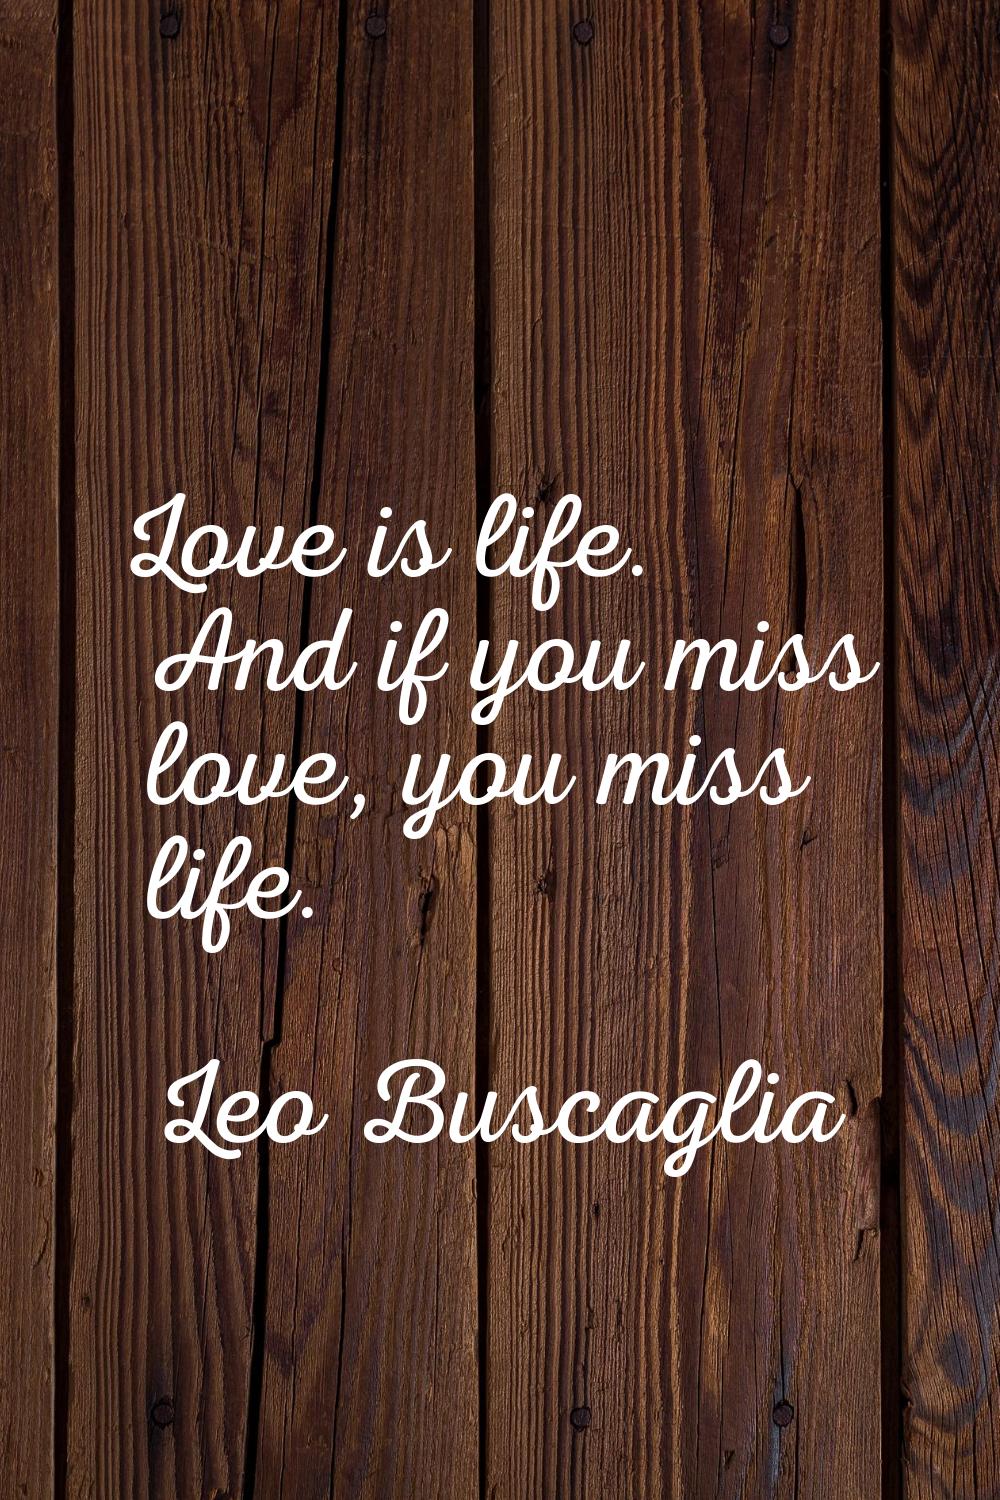 Love is life. And if you miss love, you miss life.